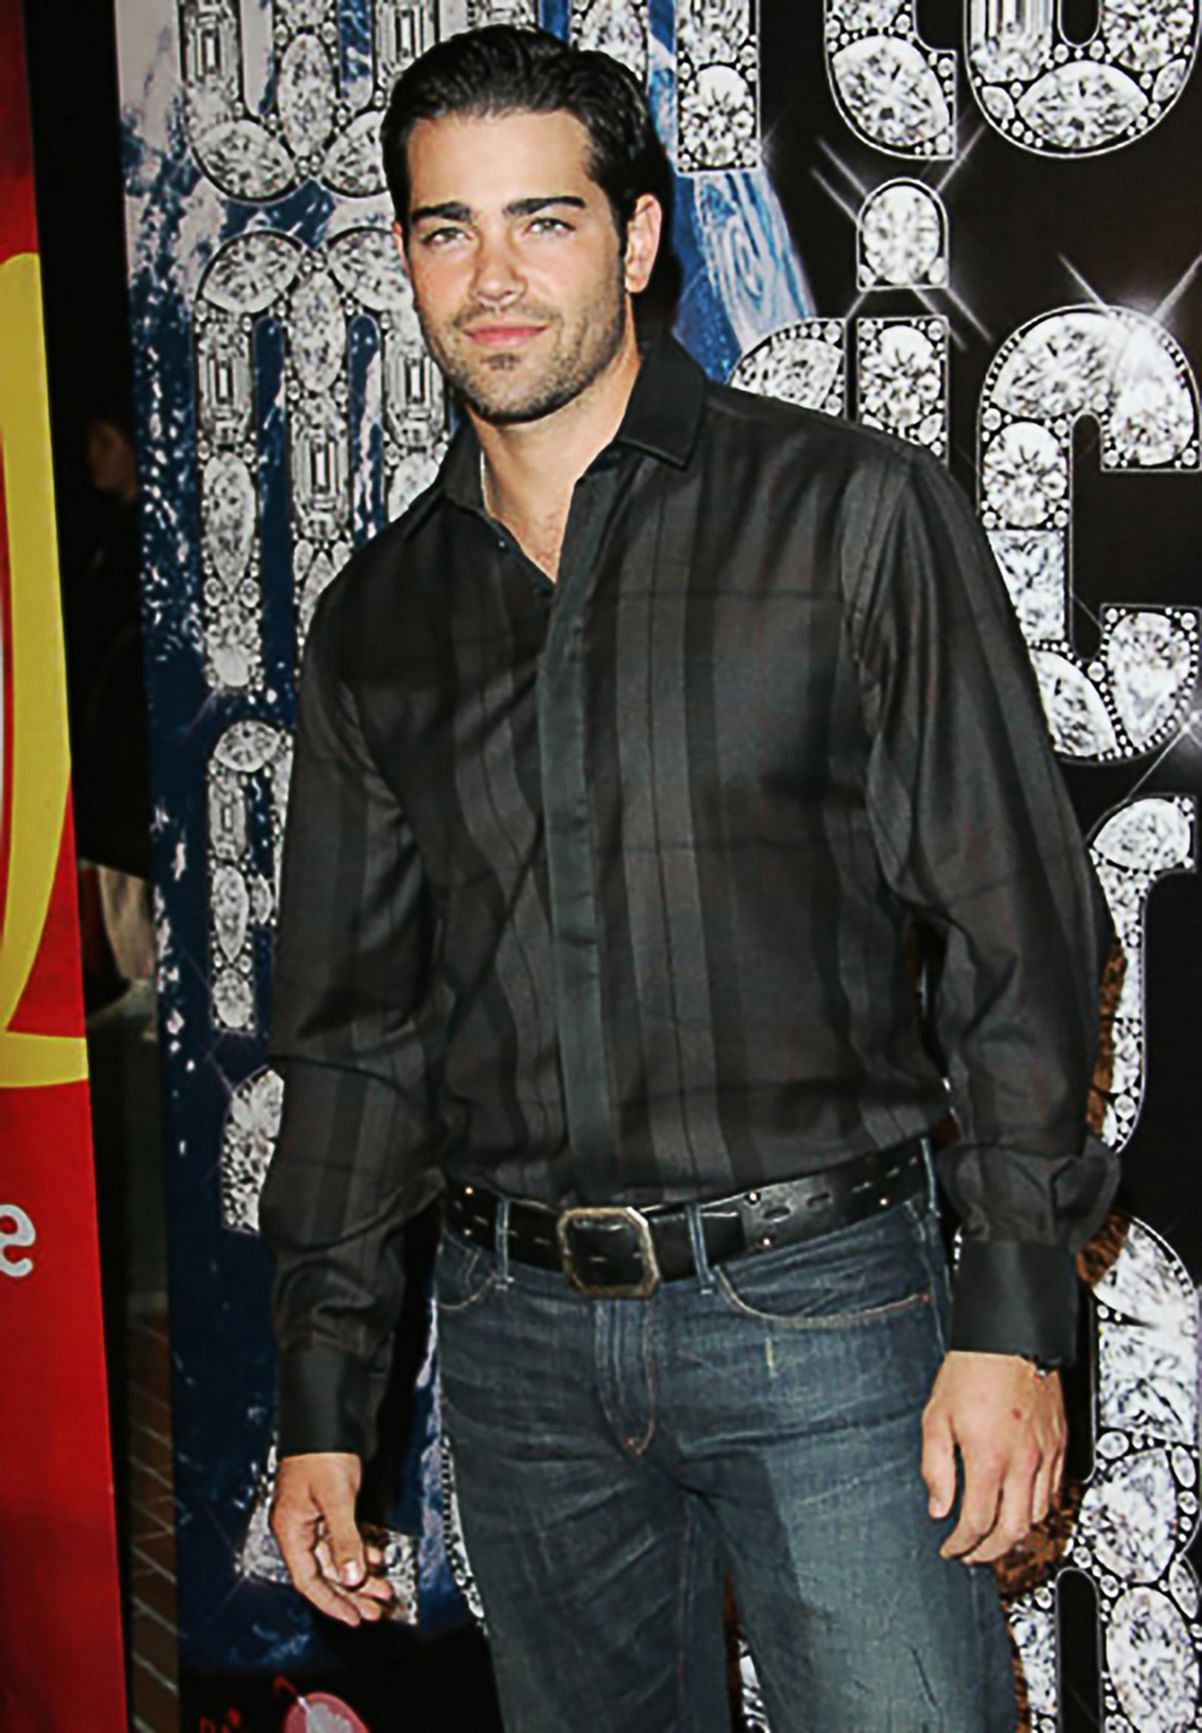 Jesse Metcalfe at the 2008 World Music Awards Monaco party (Image via Getty)